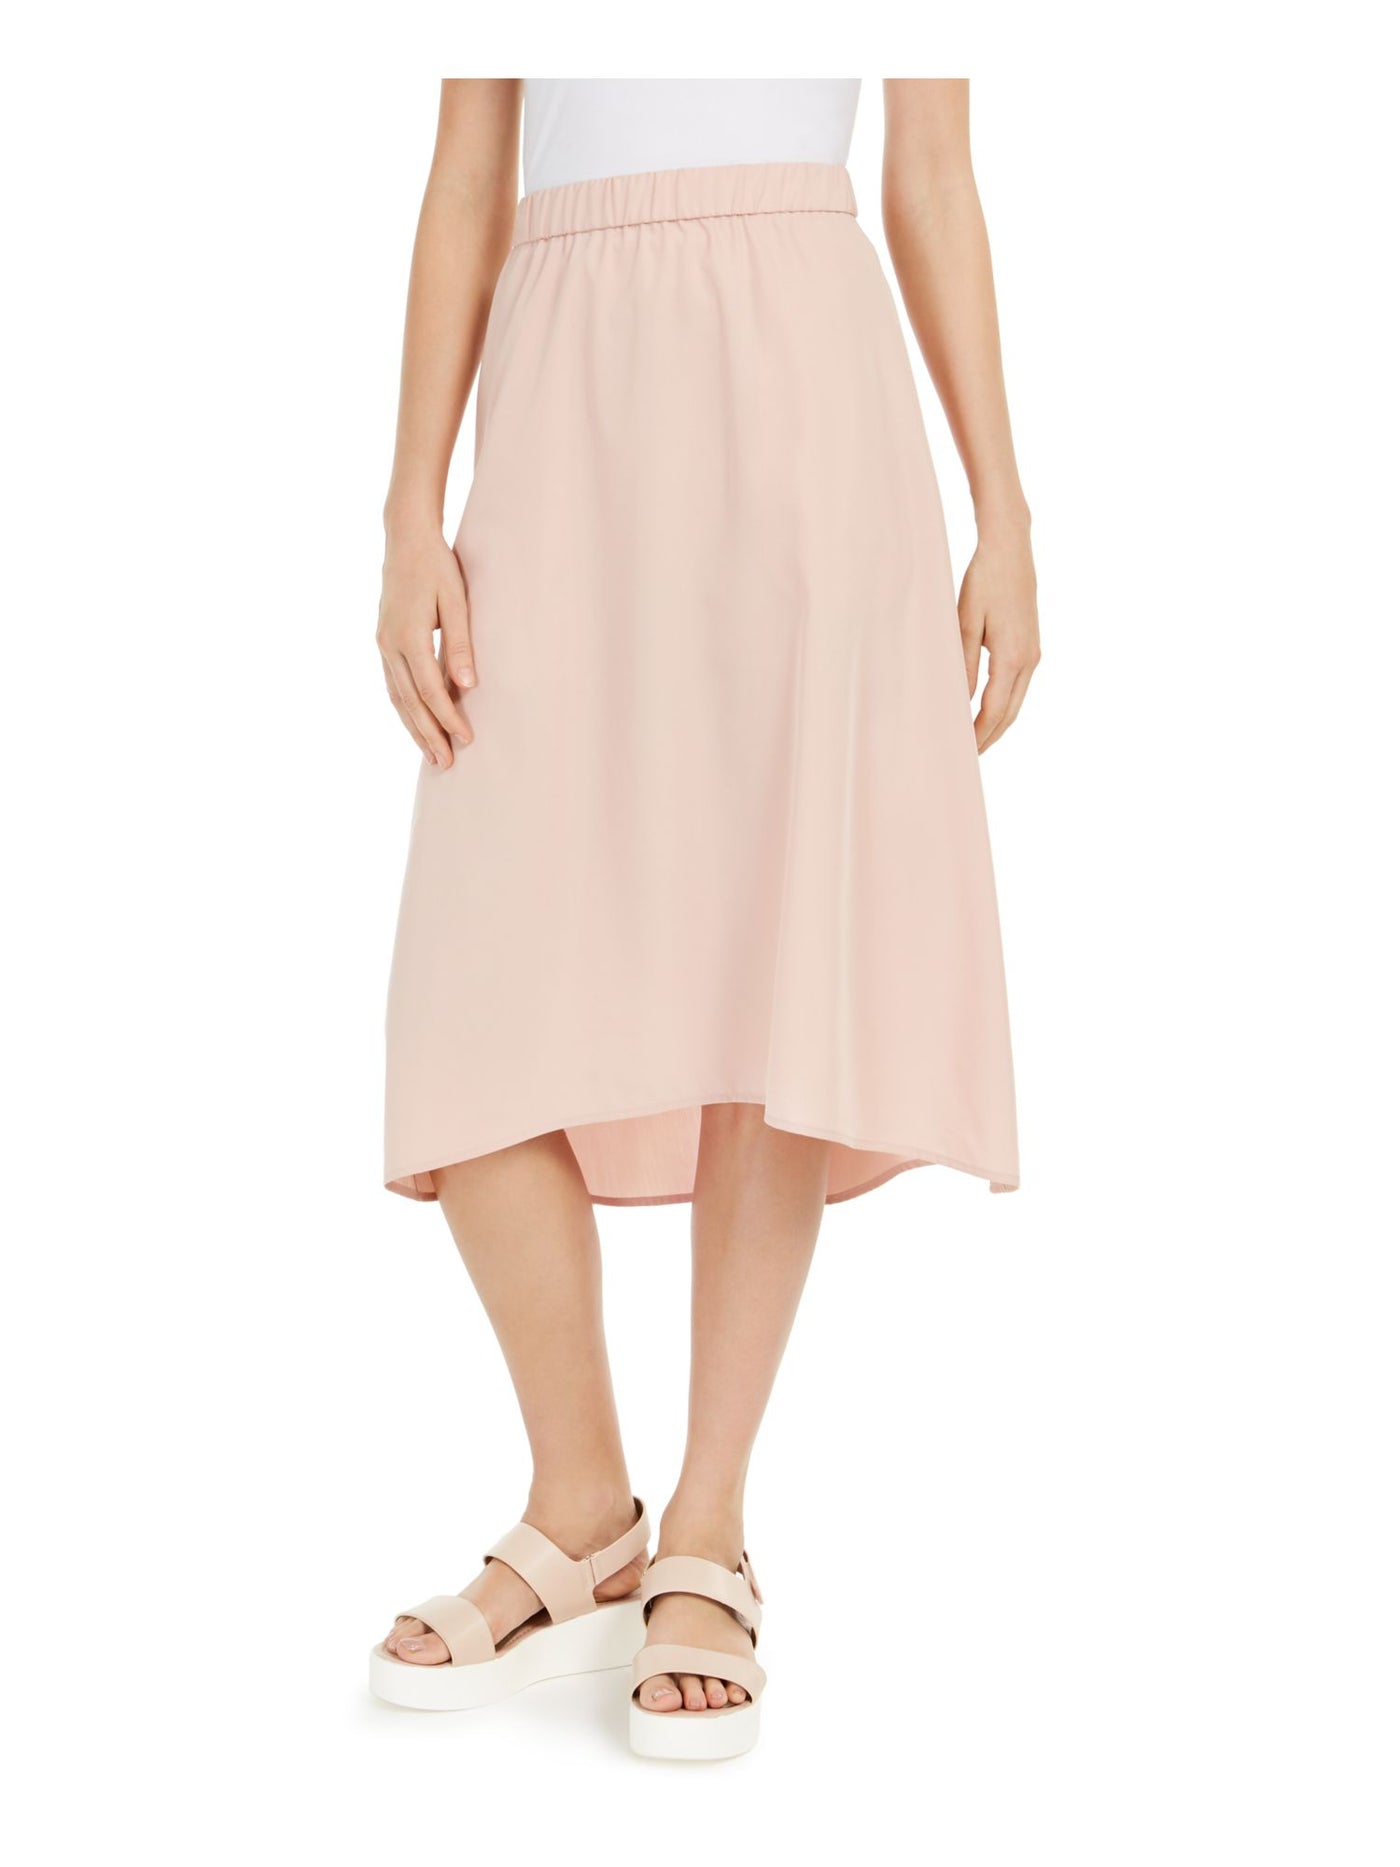 EILEEN FISHER Womens Pink Pocketed Midi Hi-Lo Skirt XL